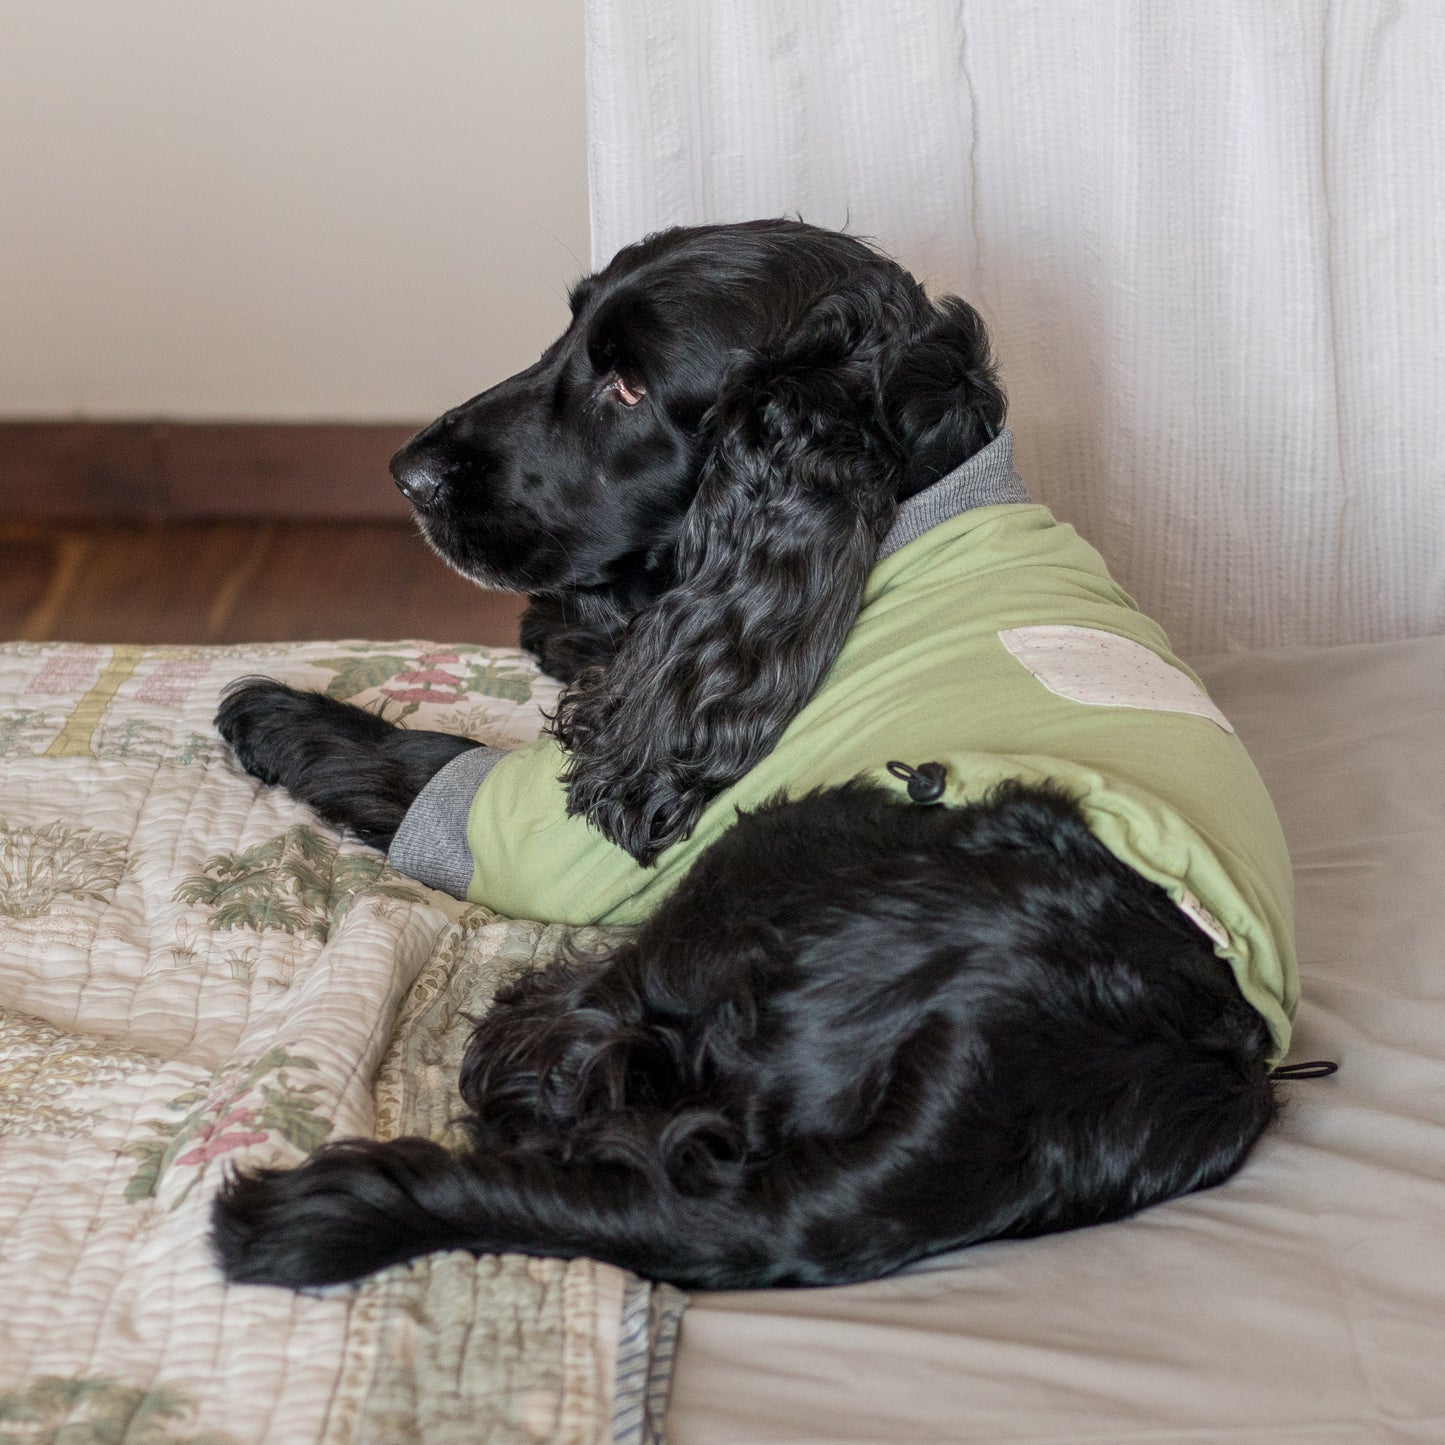 PoochMate Mint Pocket Dog T-Shirt with sleeves